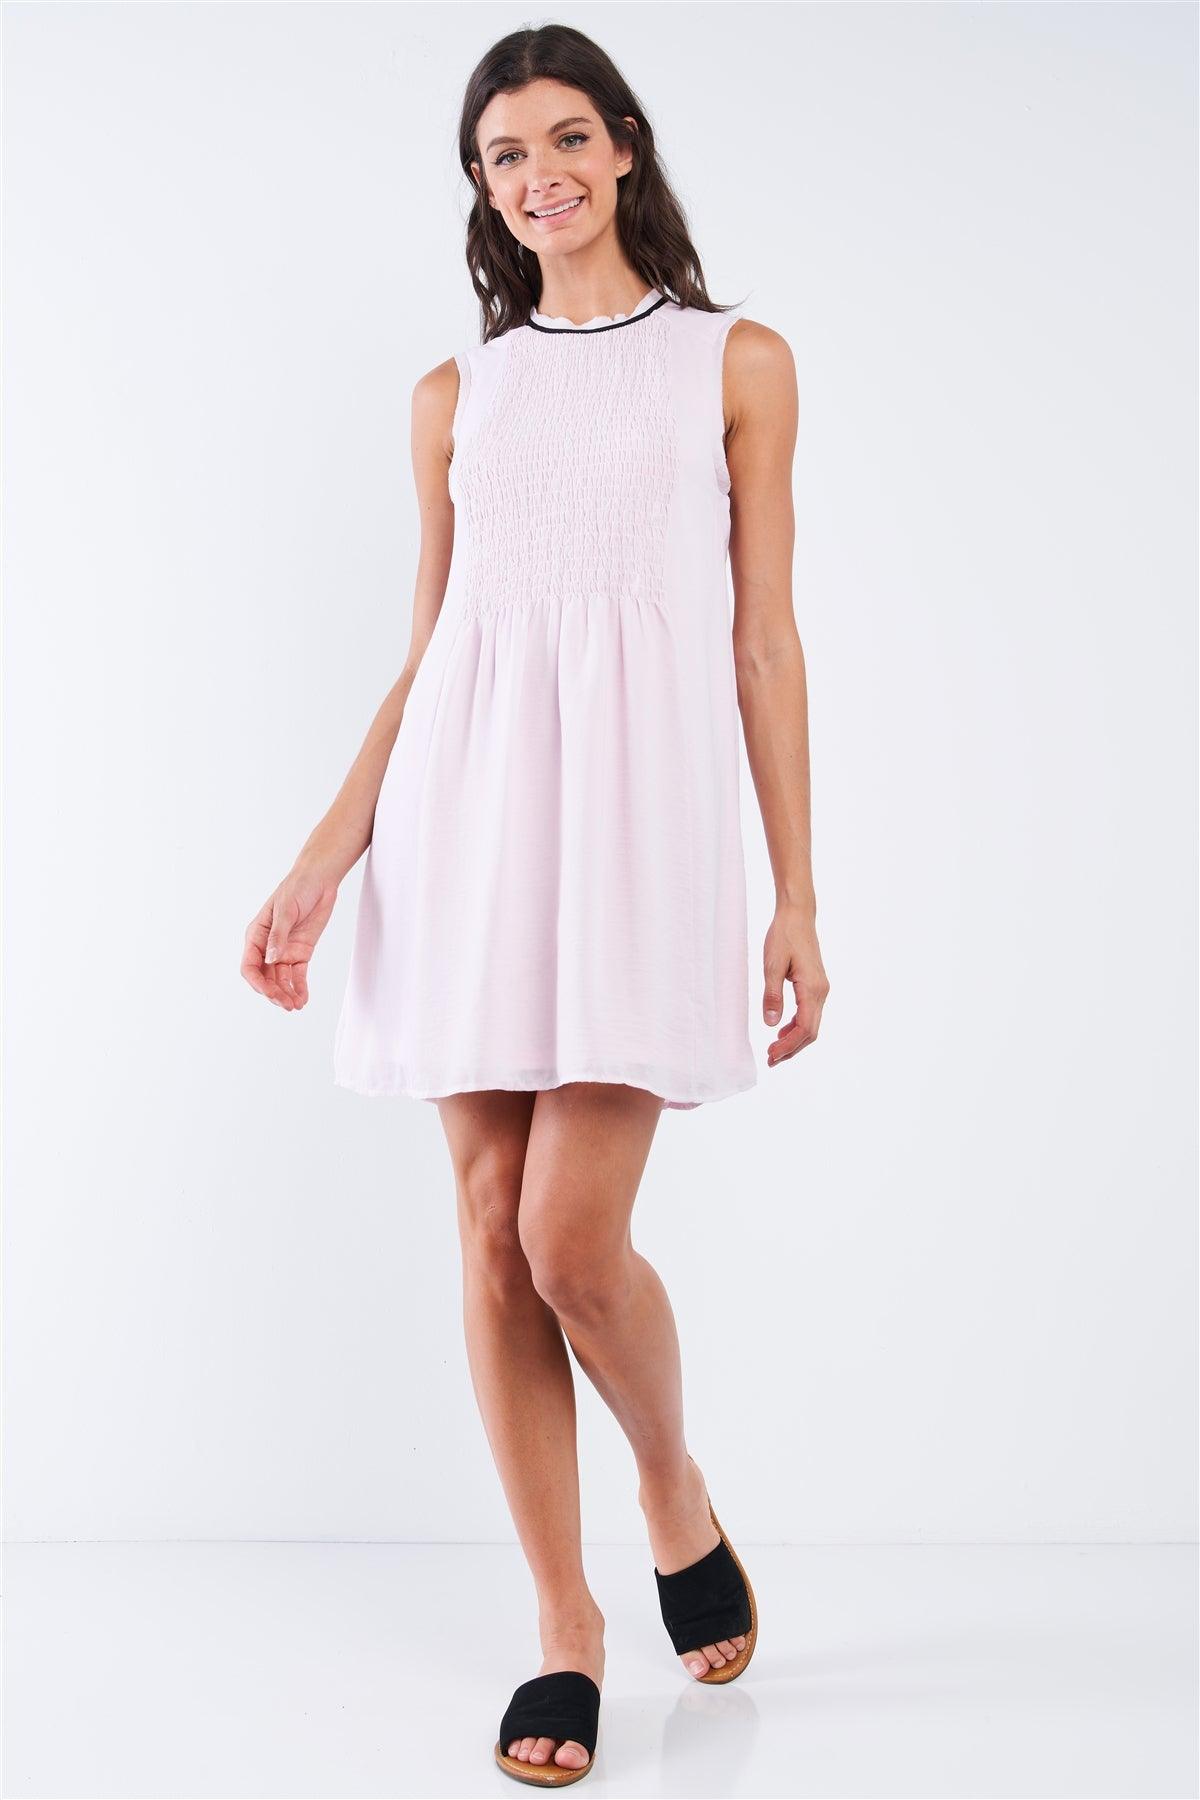 Baby Pink Sleeveless Round Neck Loose Fitting Smock Front Detail BabyDoll Mini Dress /1-2-2-1